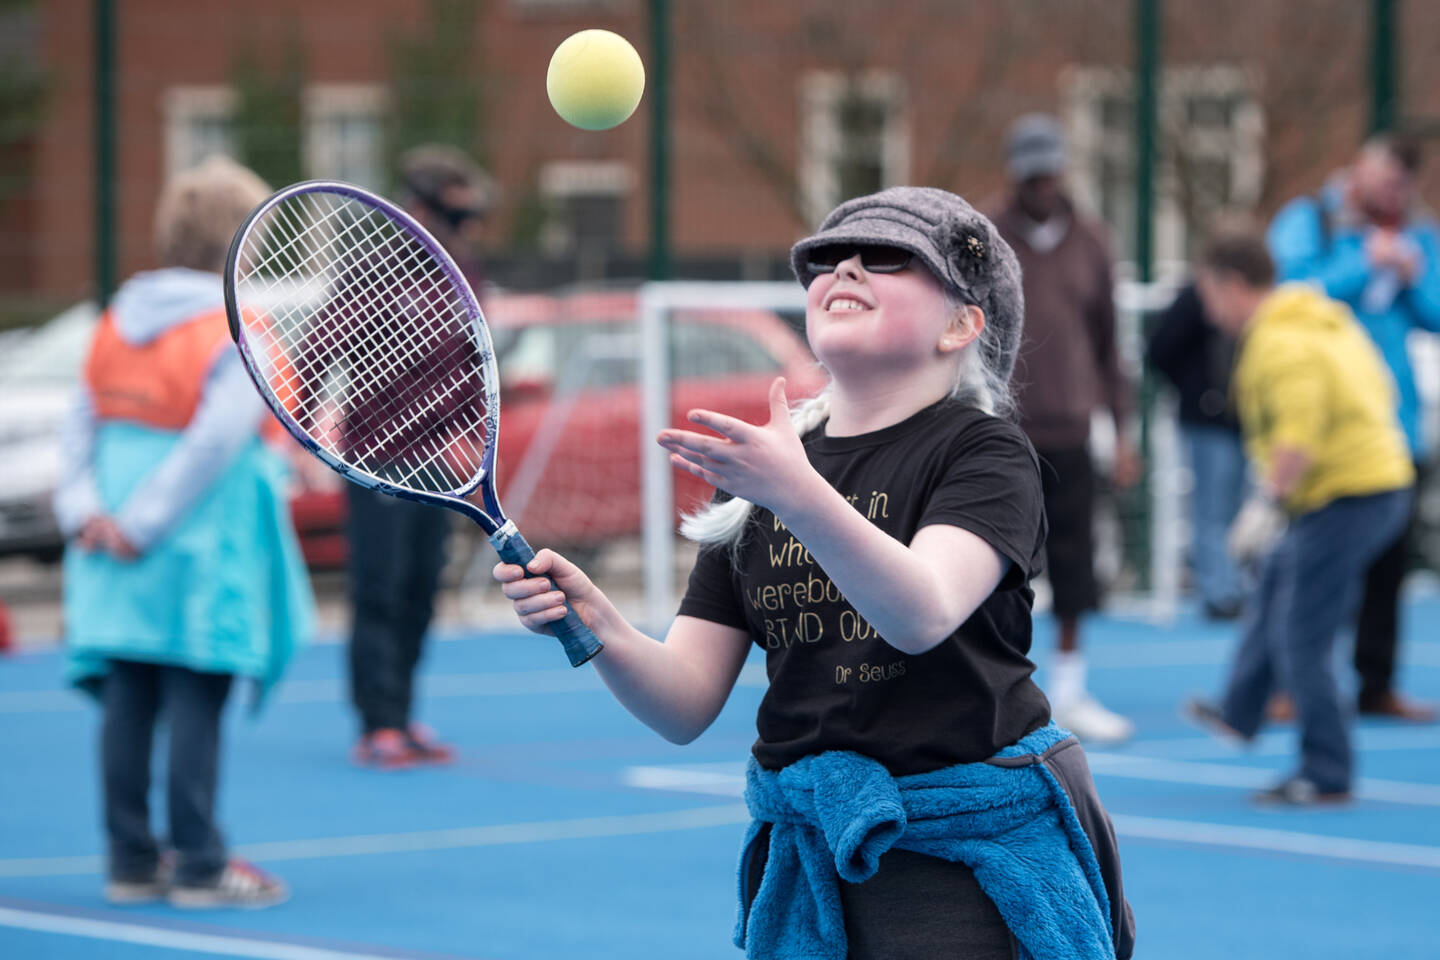 Visually impaired girl playing tennis